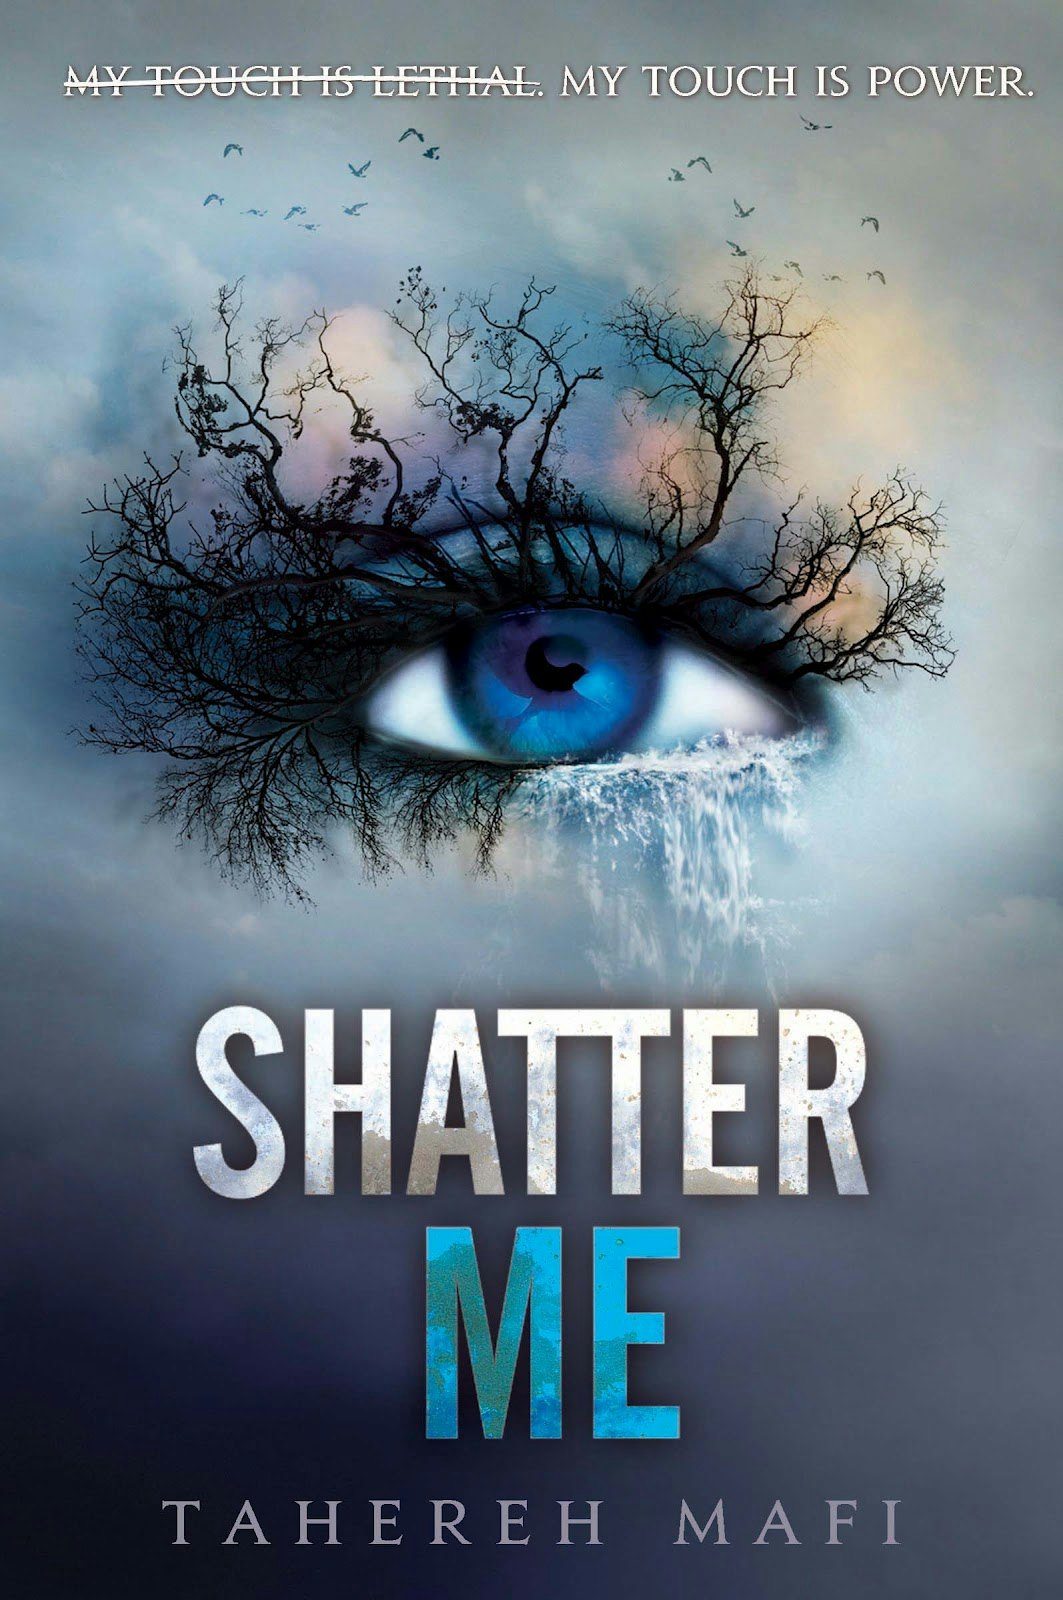 shatter me characters